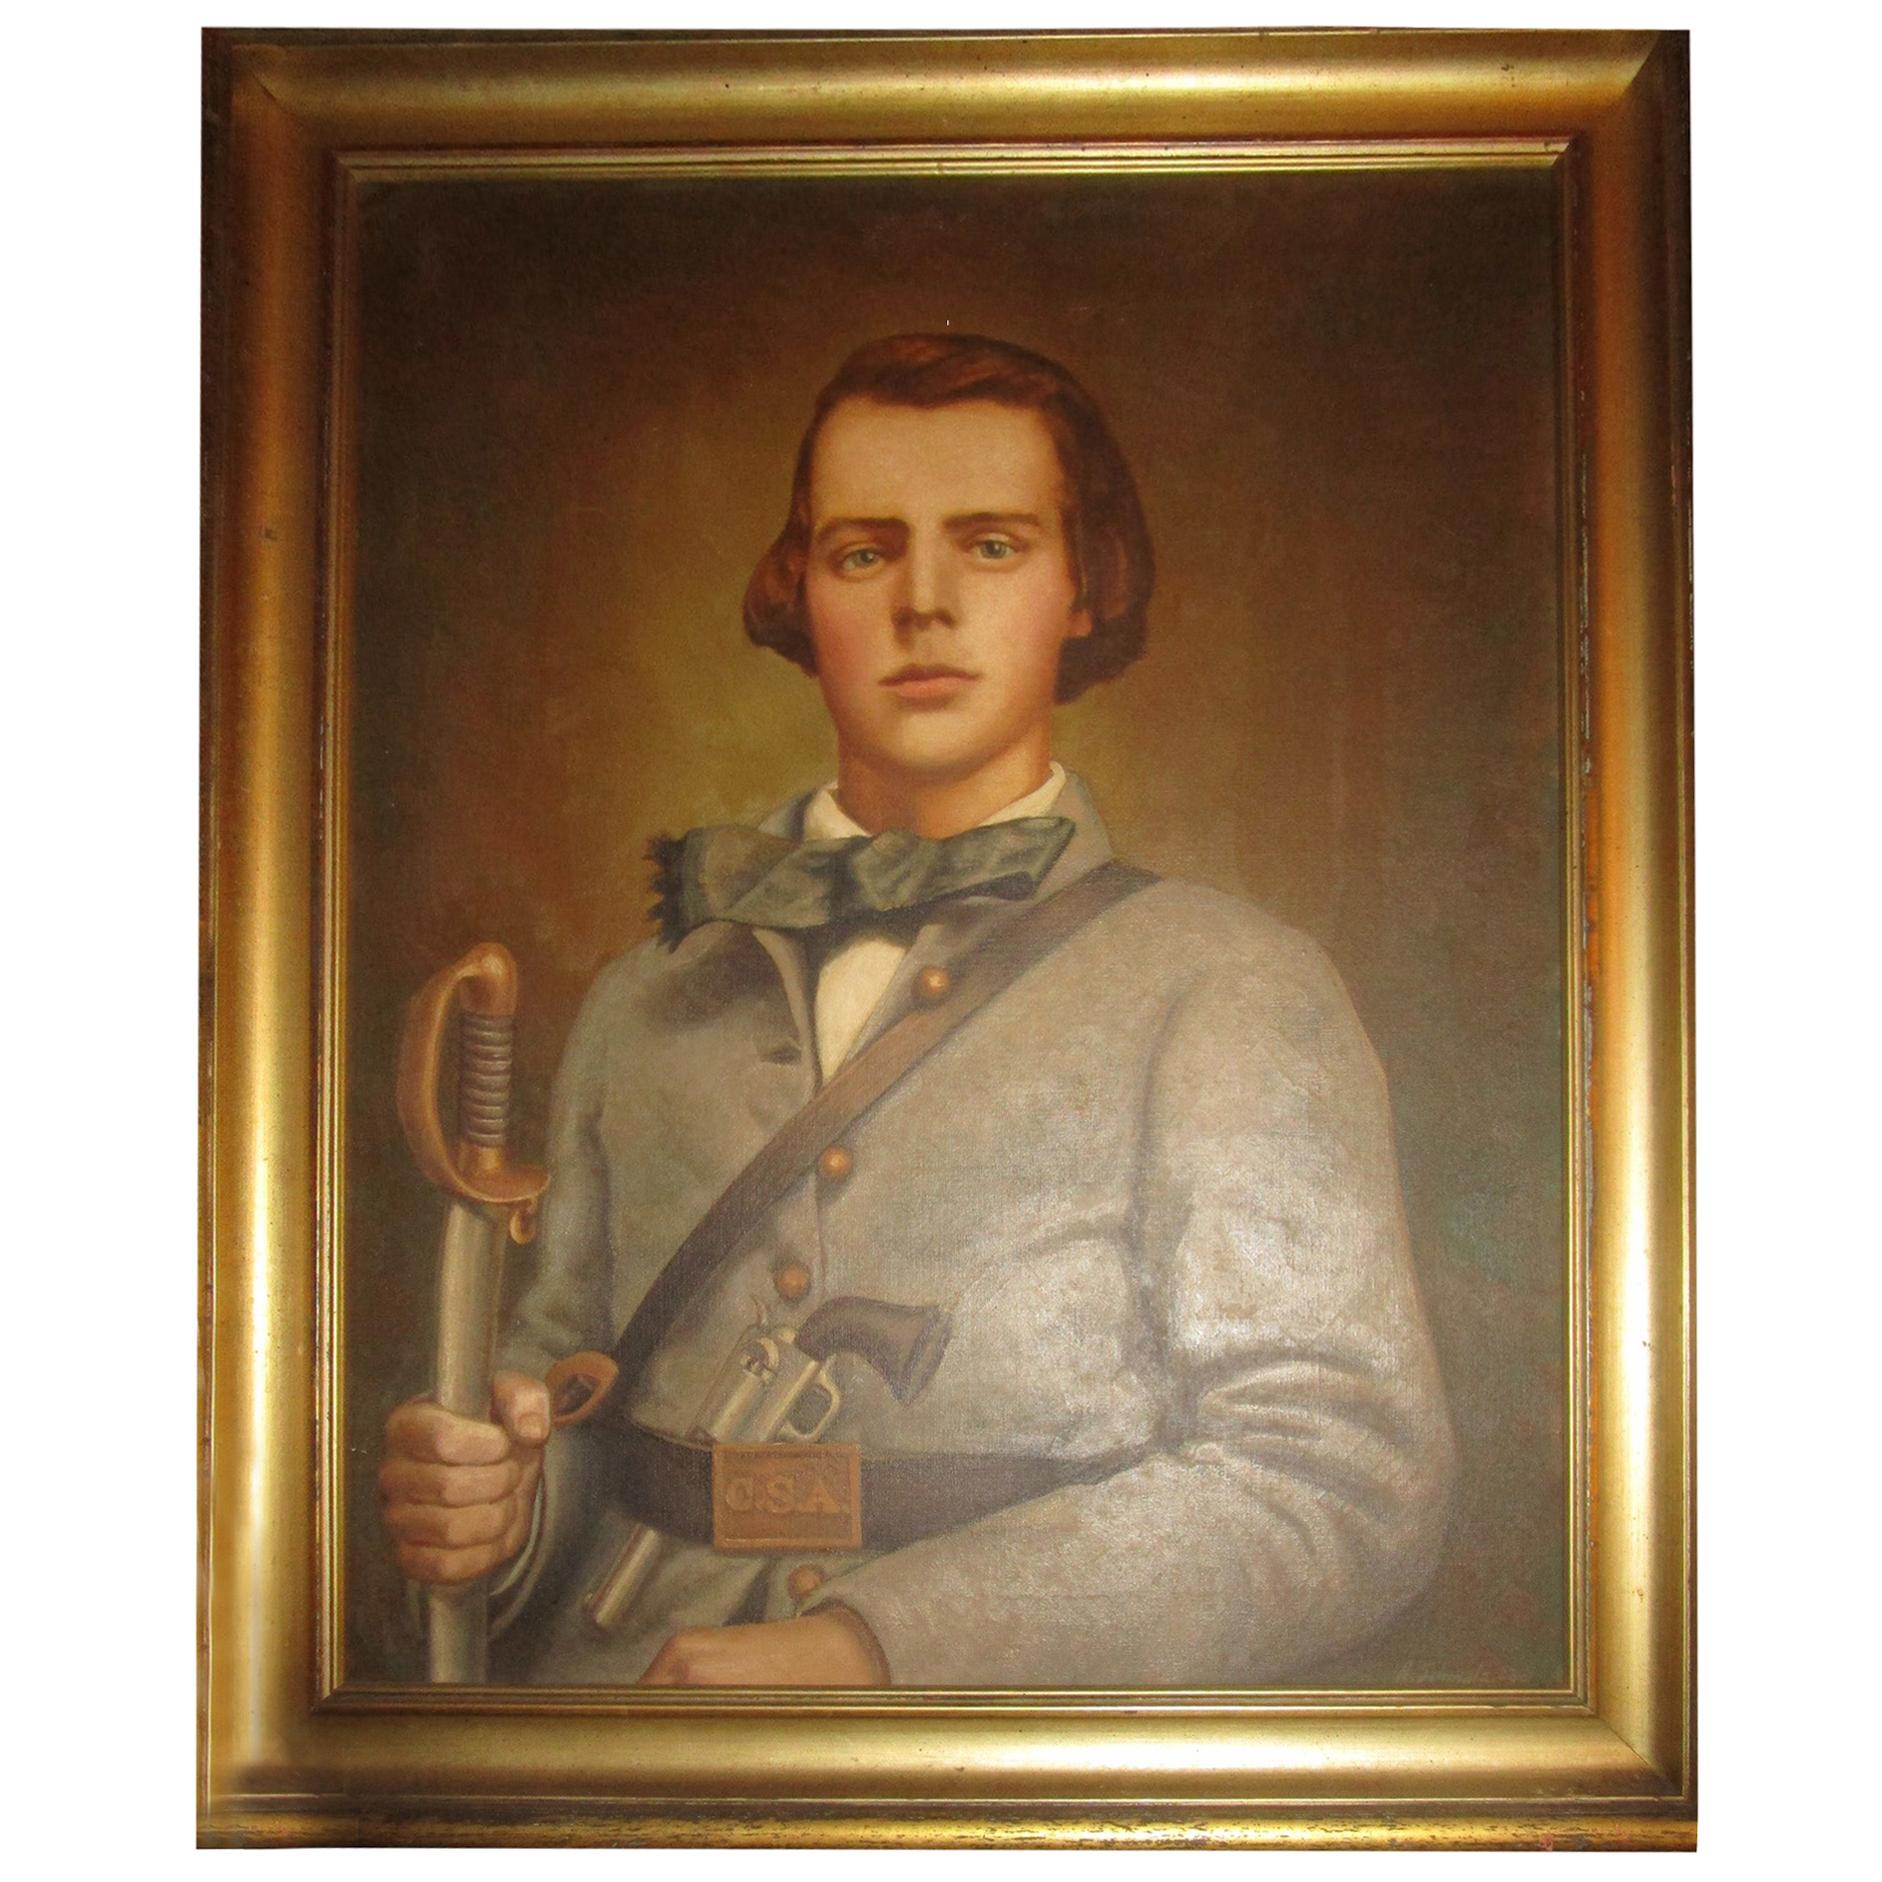 19th C American Civil War Confederate Soldier Framed Oil Painting w/ Provenance